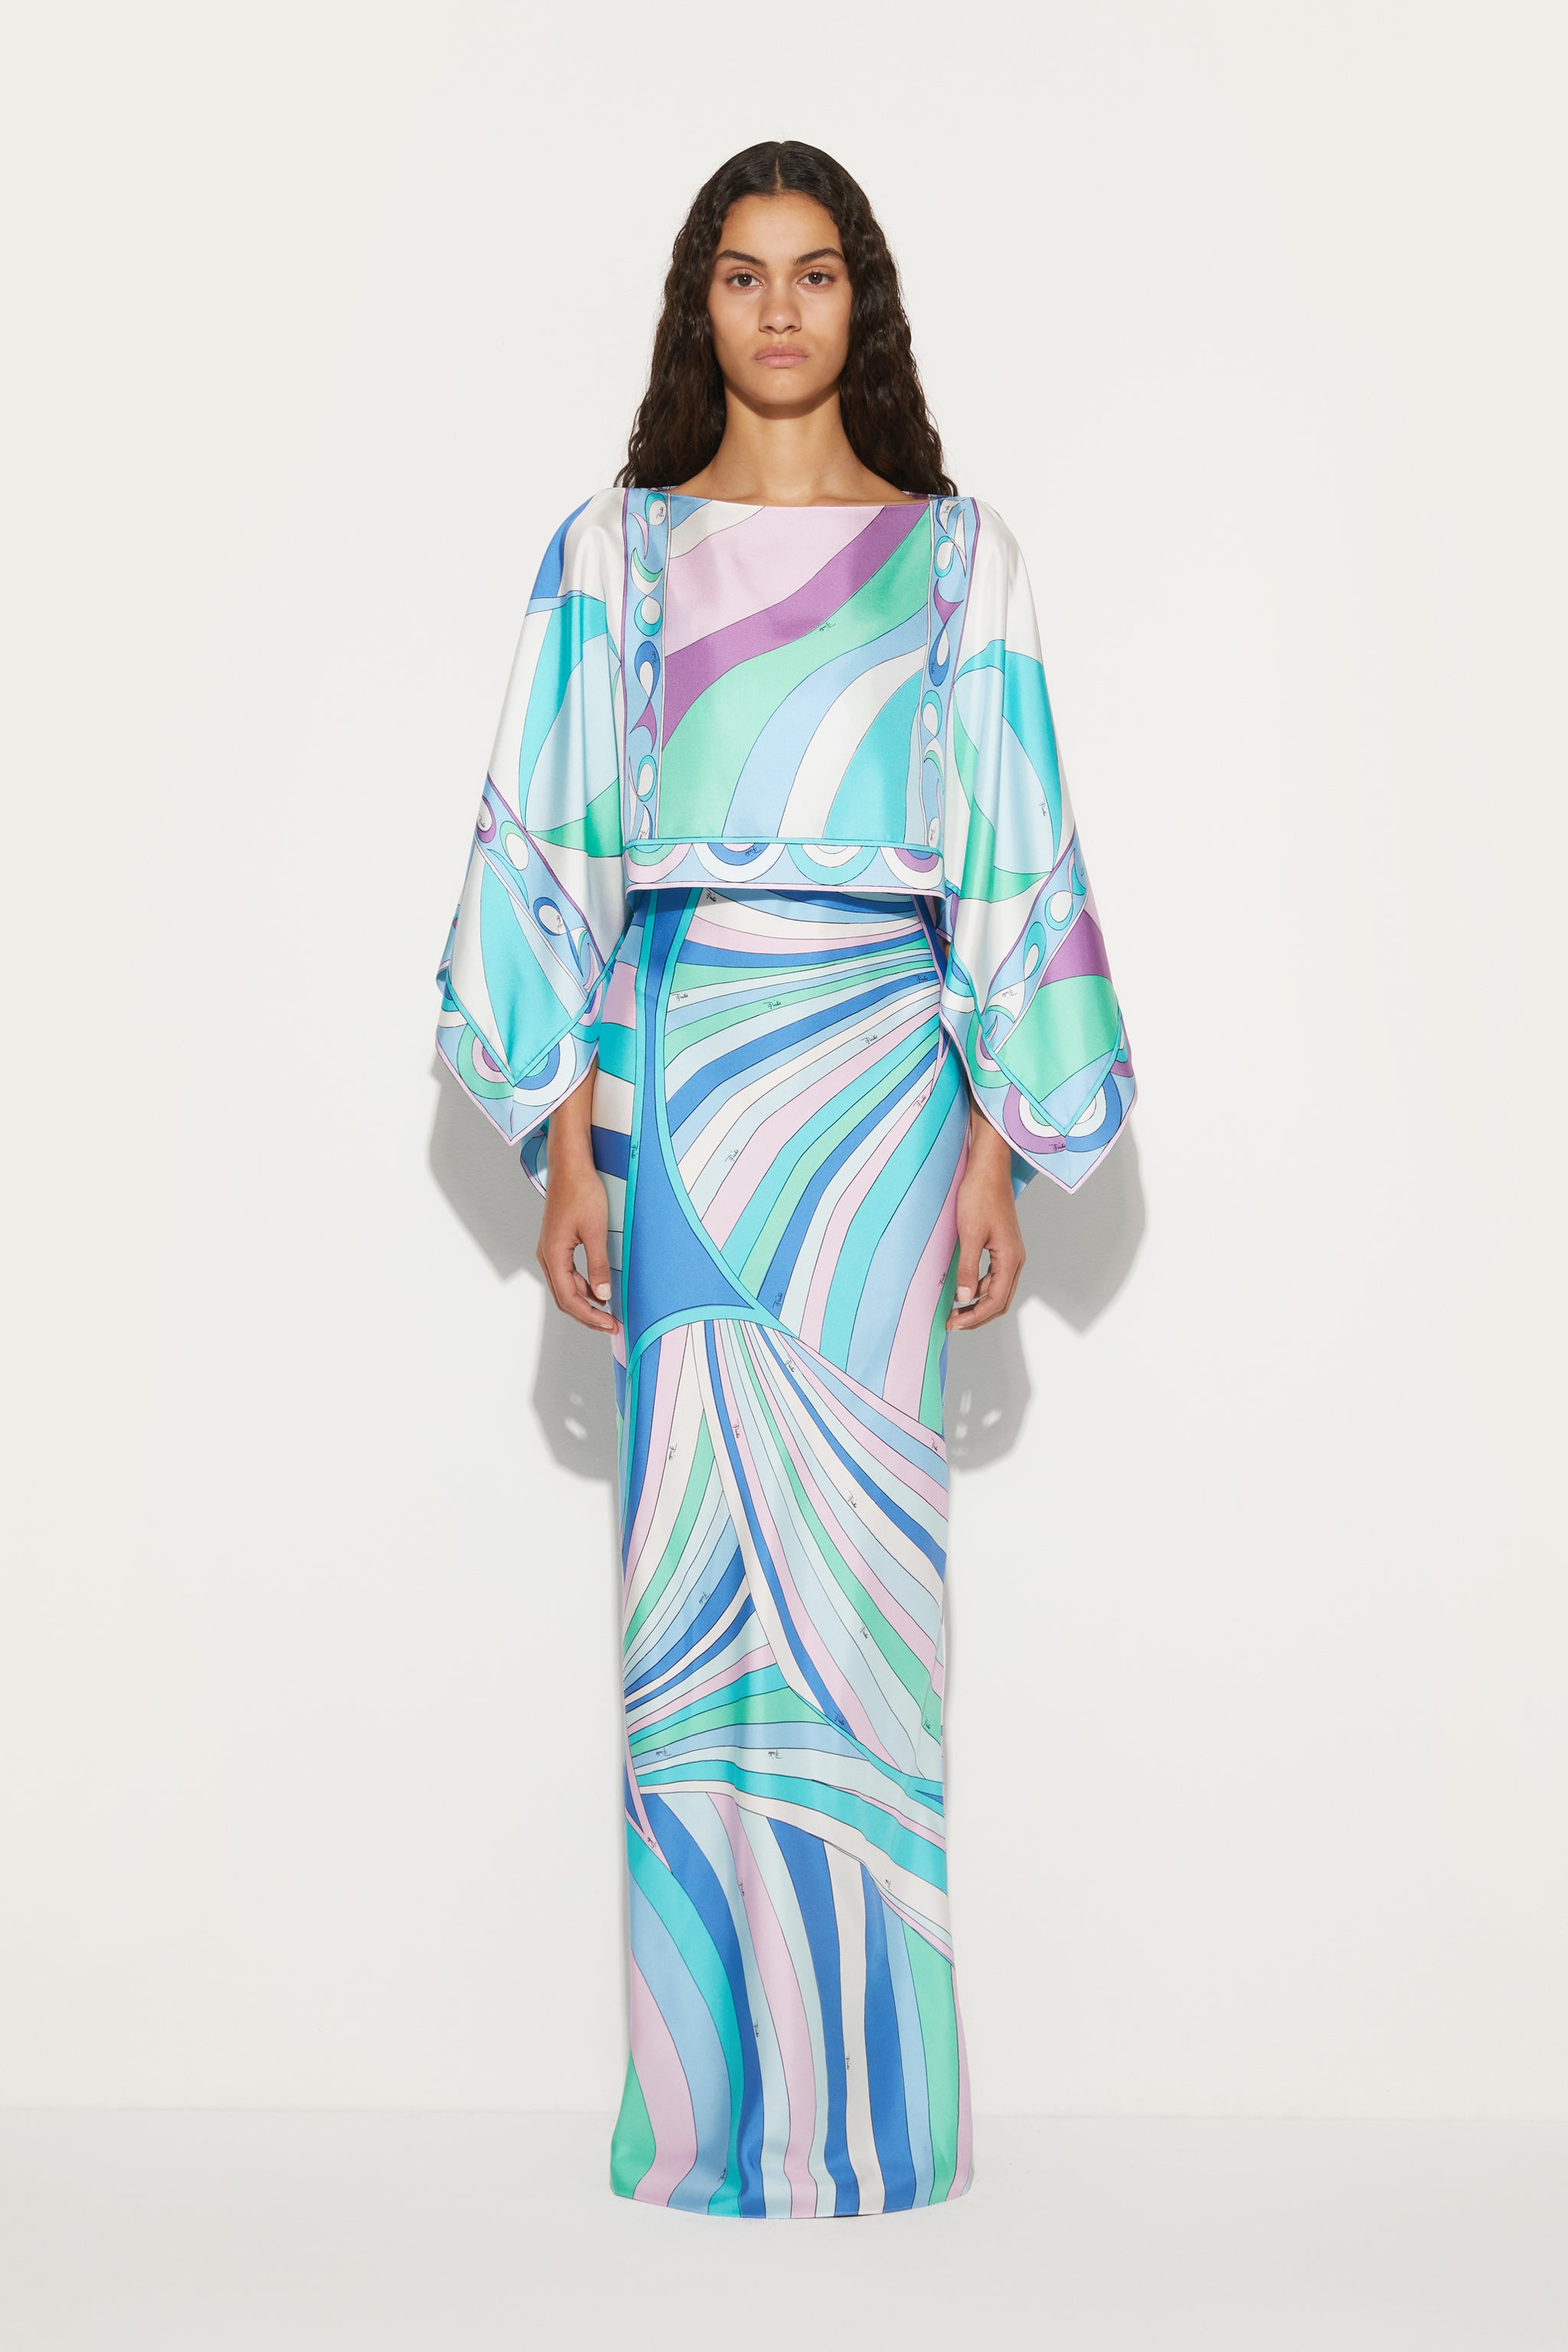 Pucci Woman Ready to wear & accessories | Pucci